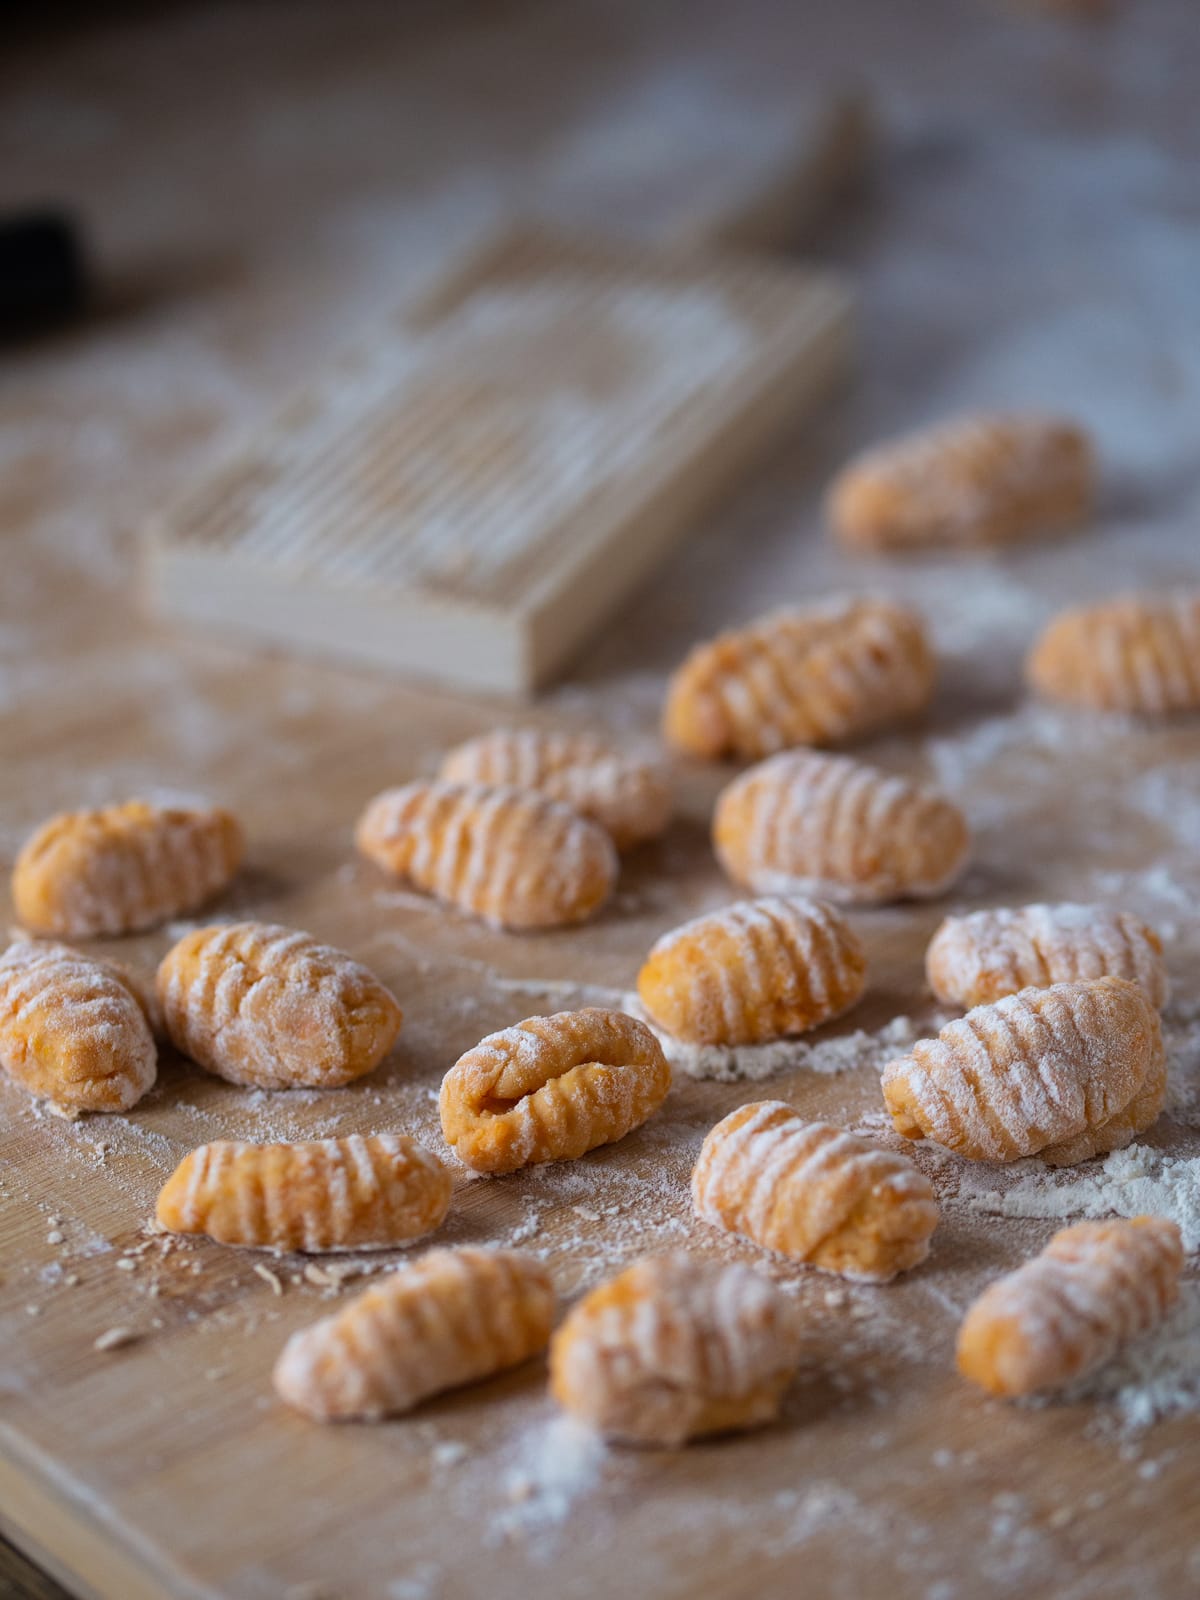 Fresh gnocchi that have been pressed onto a gnocchi board to create little ridges.